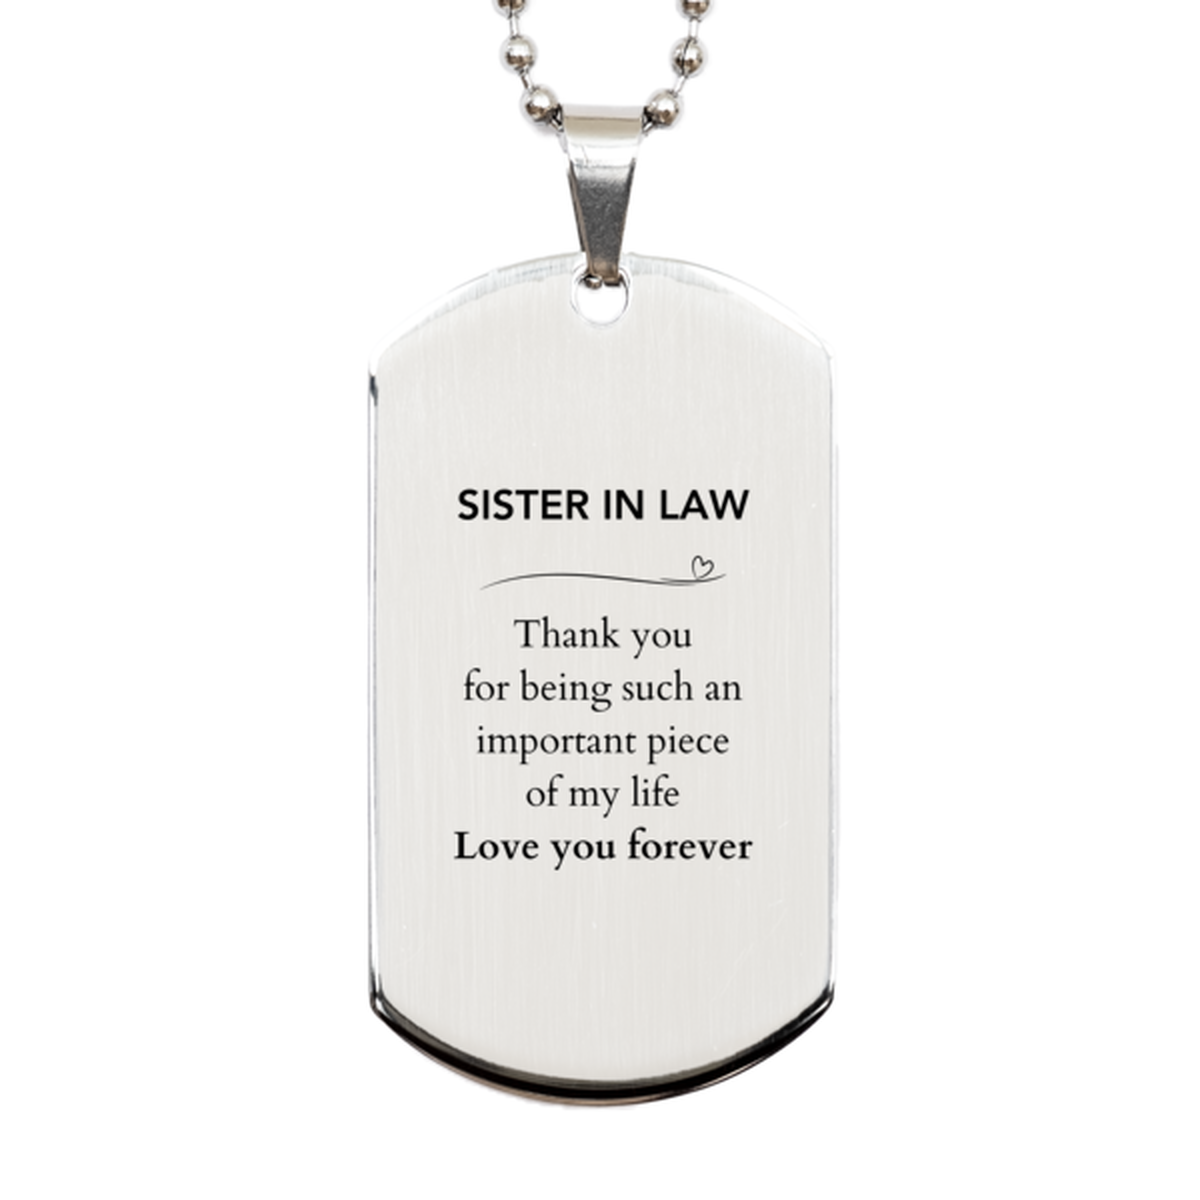 Appropriate Sister In Law Silver Dog Tag Epic Birthday Gifts for Sister In Law Thank you for being such an important piece of my life Sister In Law Christmas Mothers Fathers Day